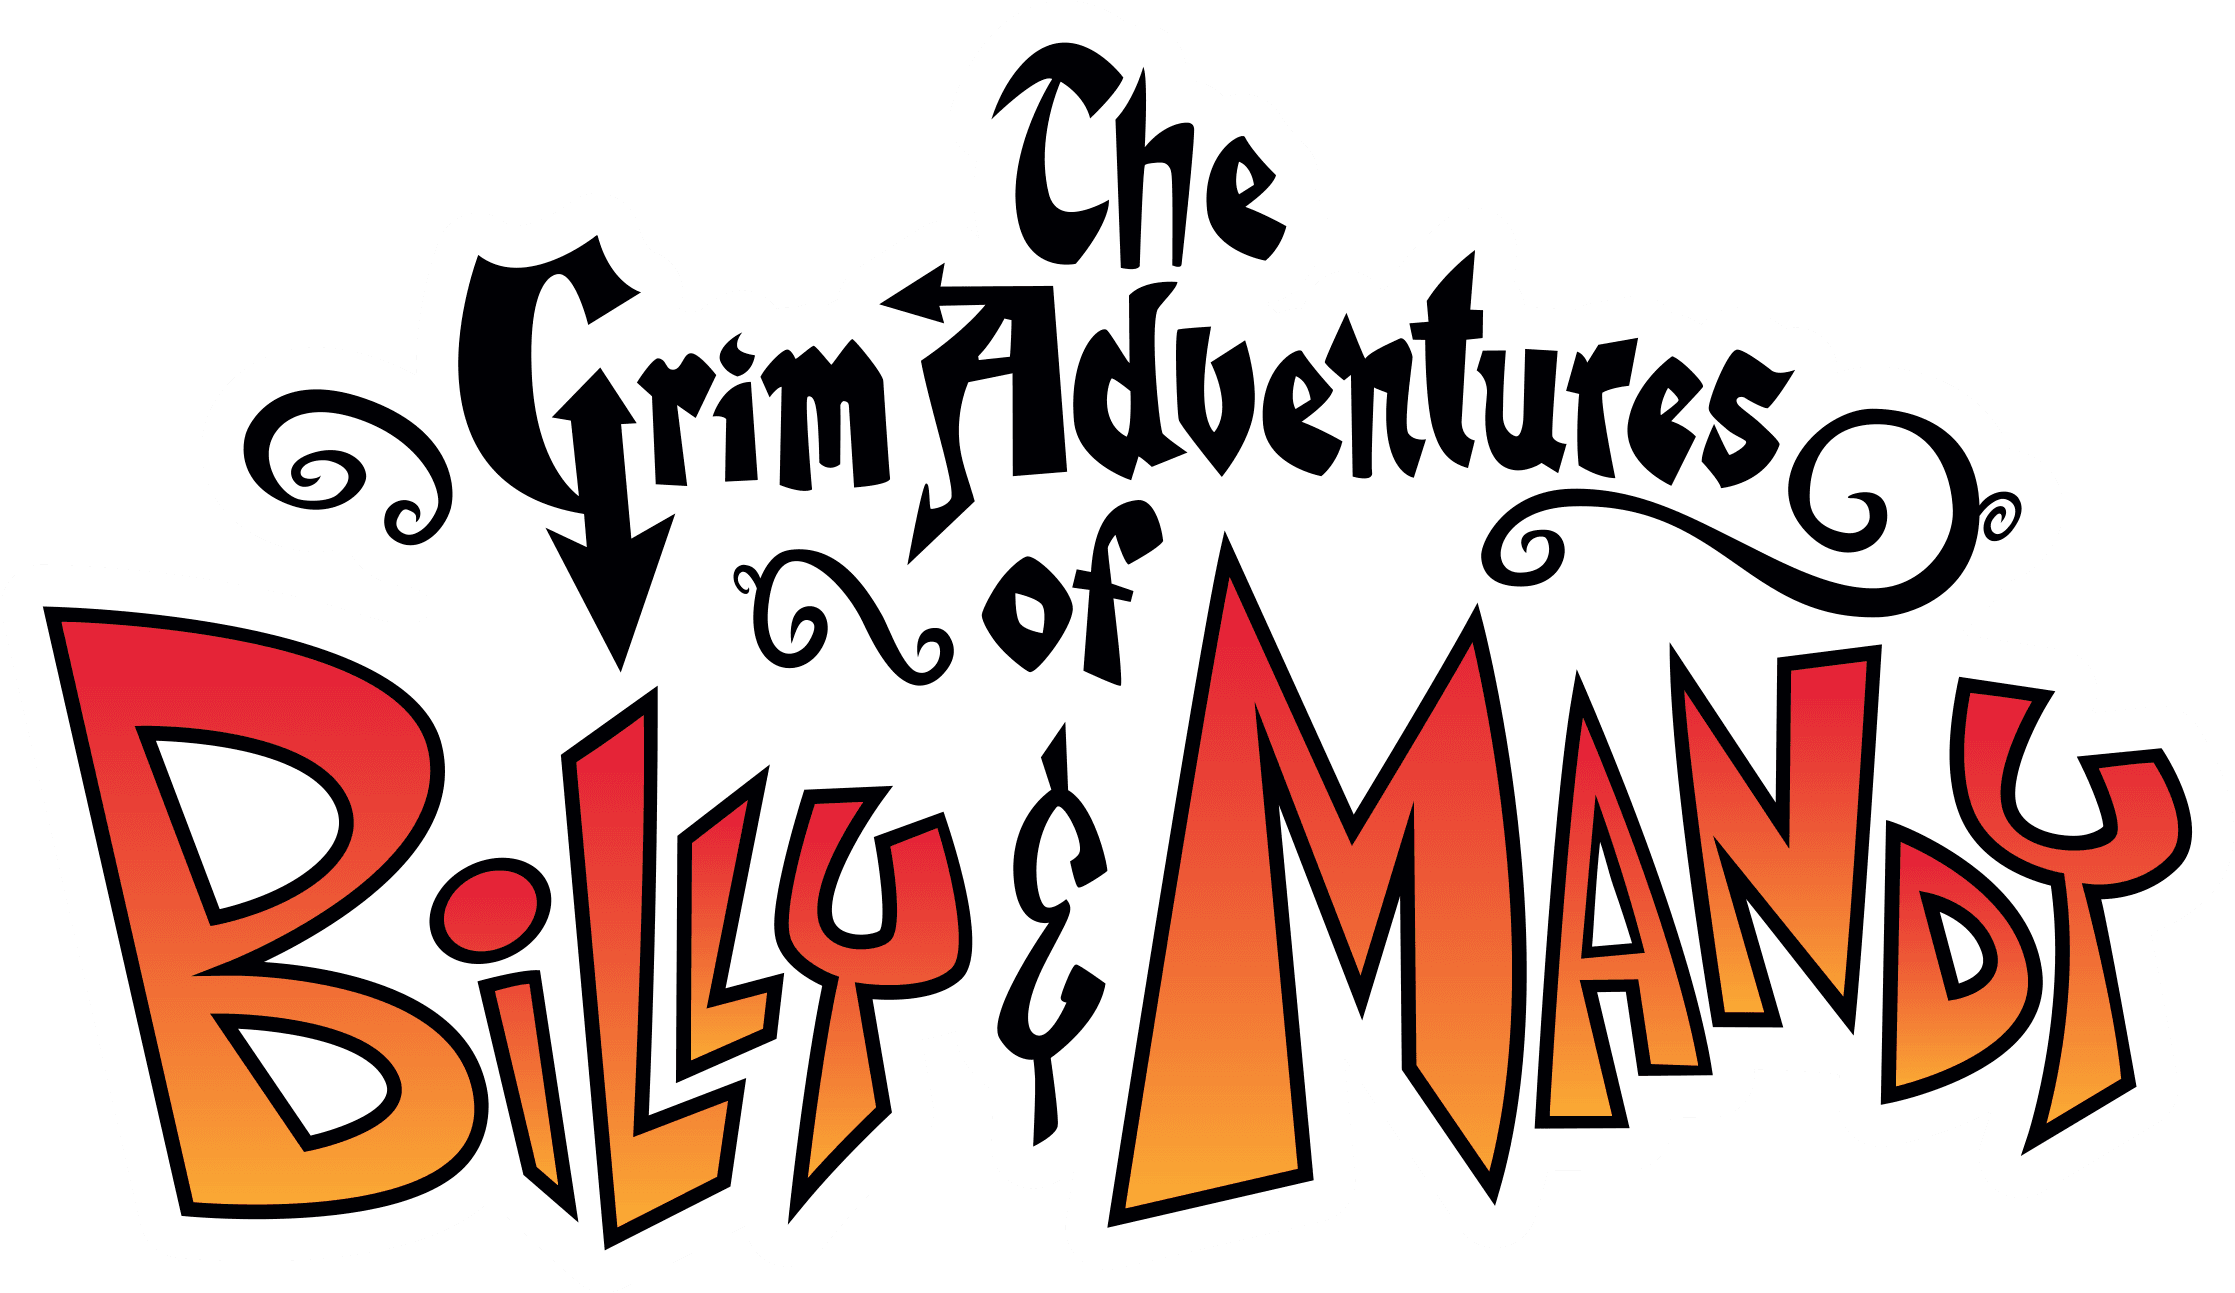 The Grim Adventures of Billy and Mandy logo